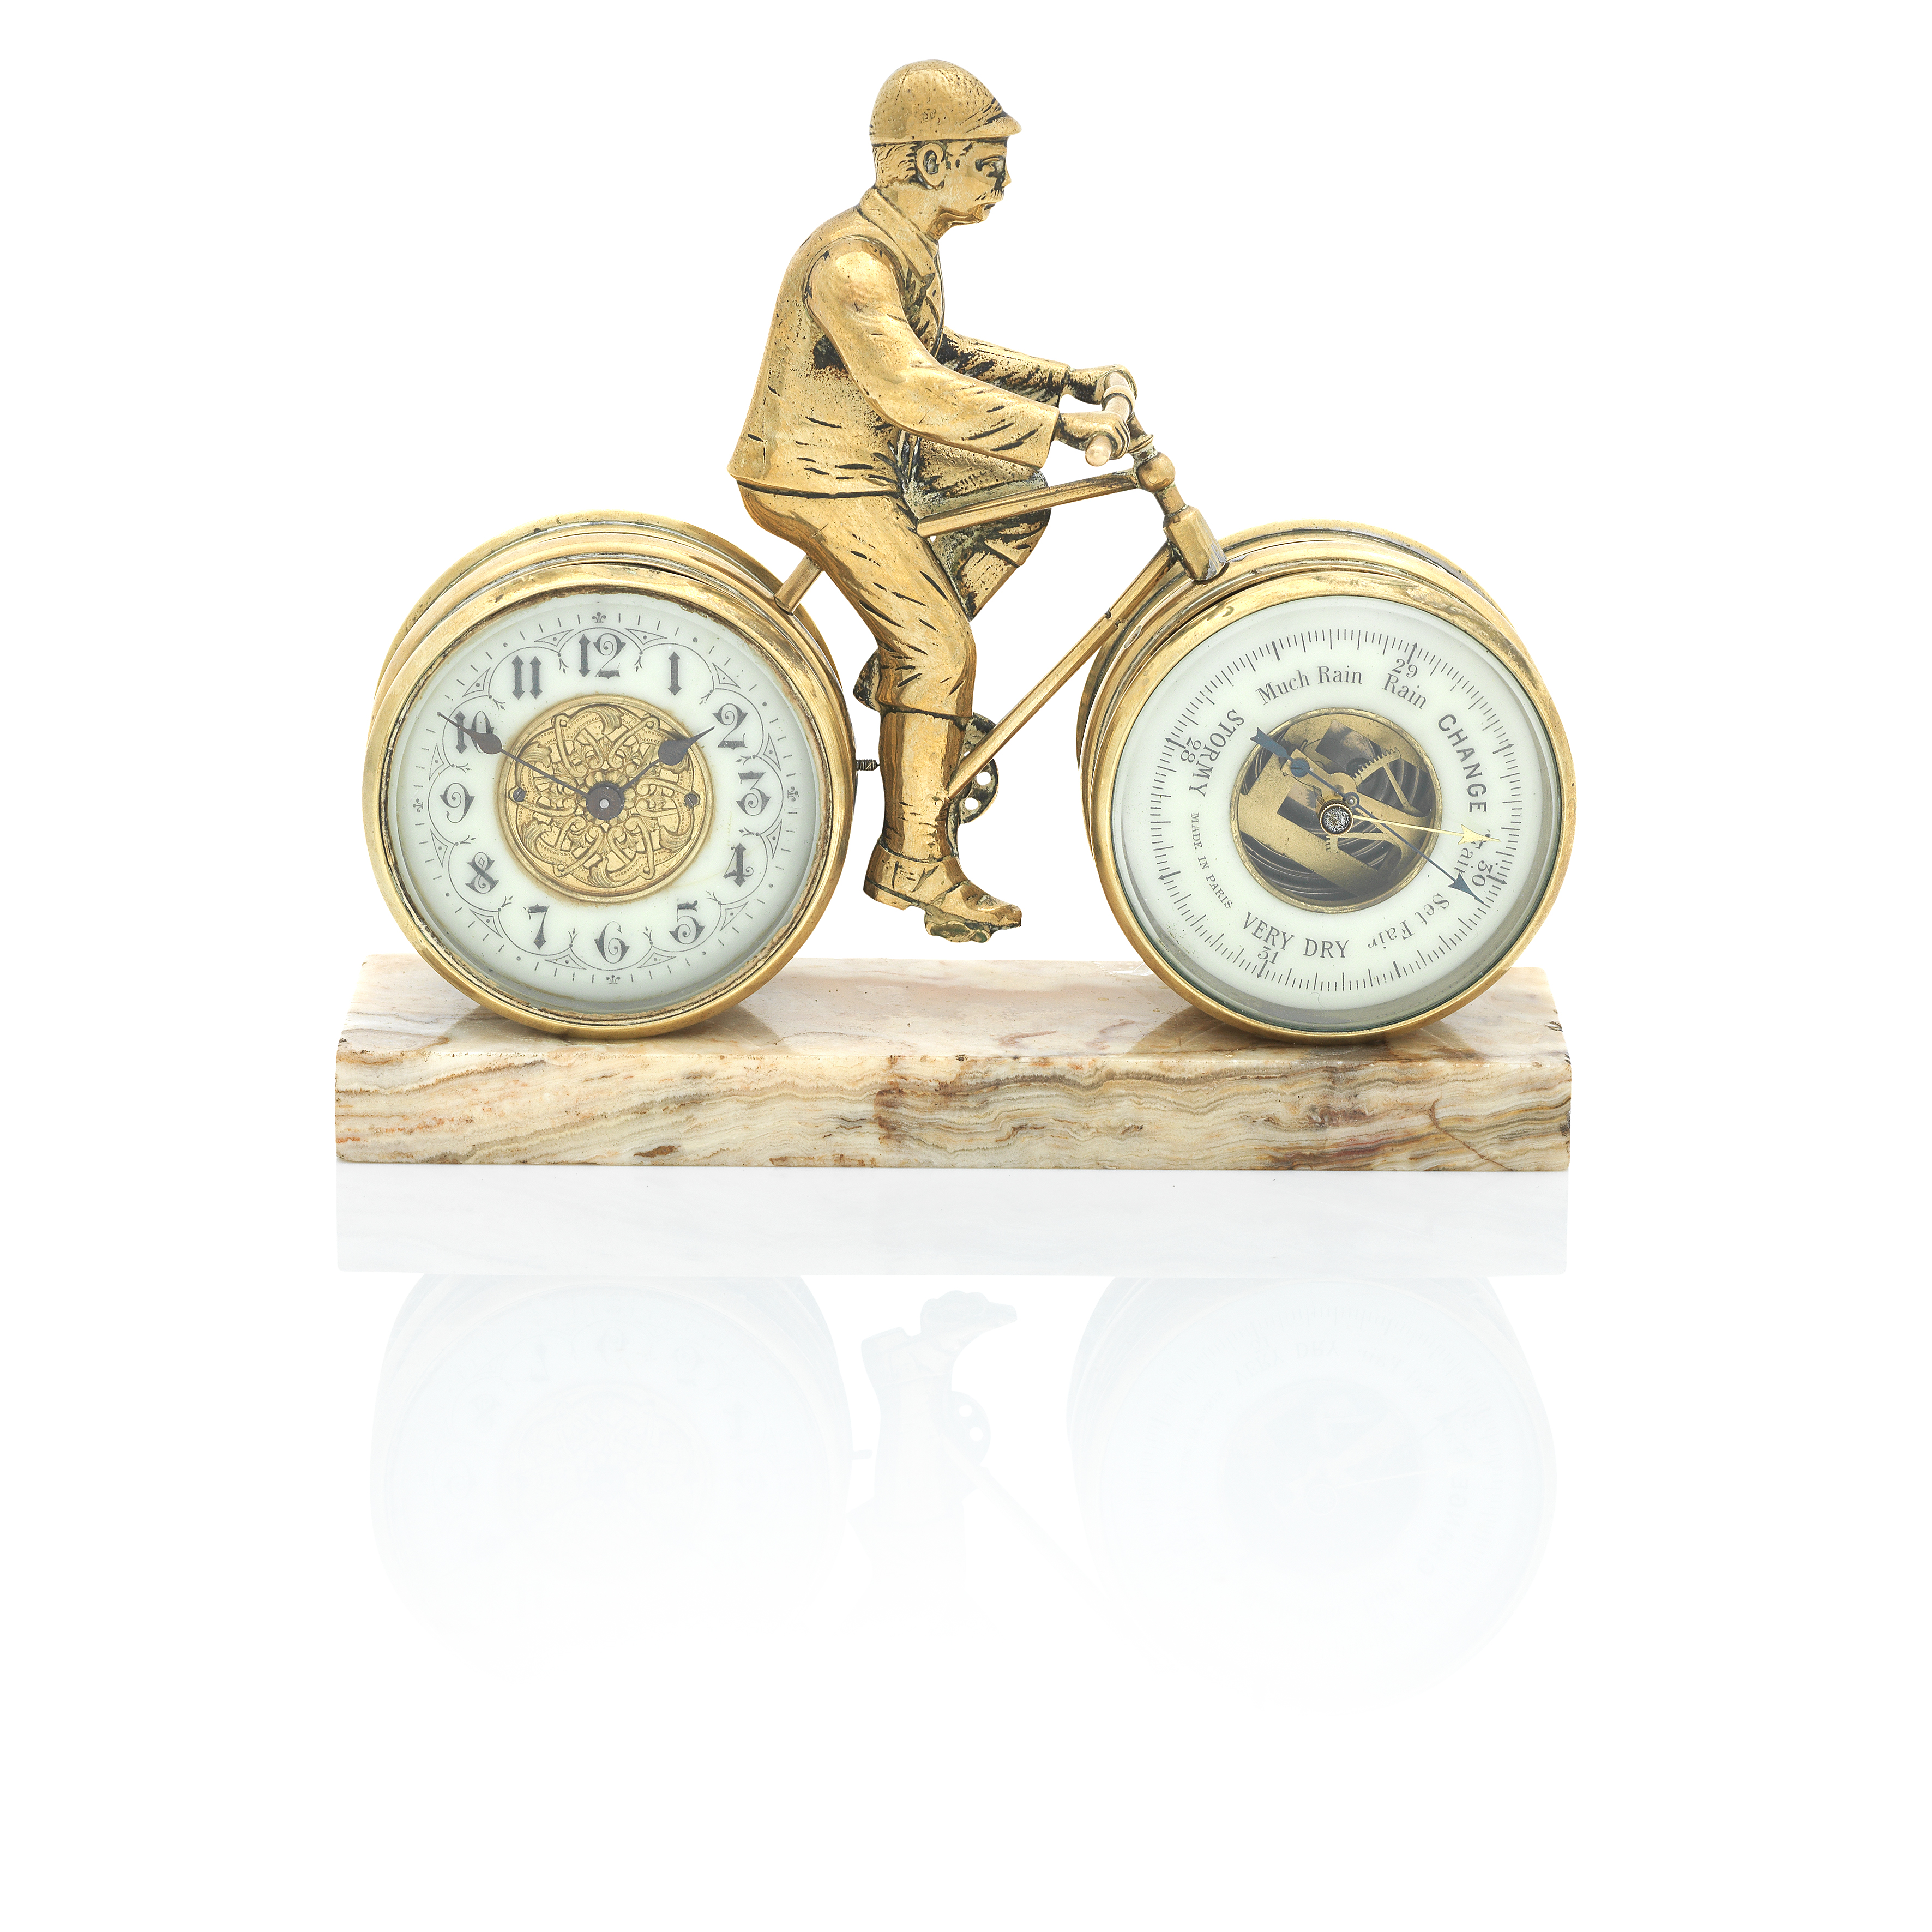 A late 19th/early 20th century Novelty cyclist timepiece/barometer desk compendium